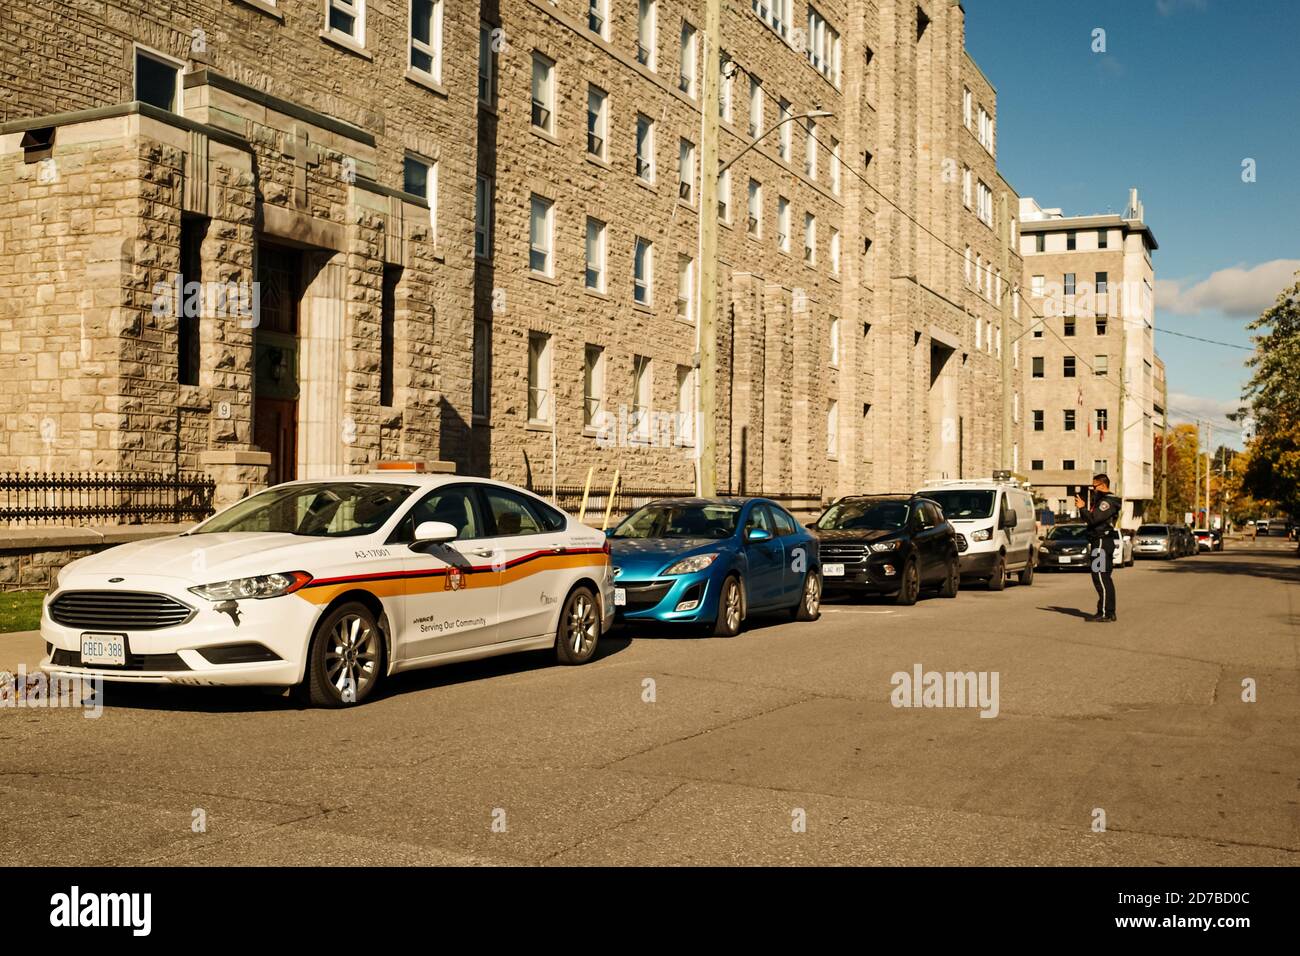 Ottawa, Ontario, Canada - October 8, 2020: A by-law officer with the City of Ottawa enforces parking restrictions. Stock Photo